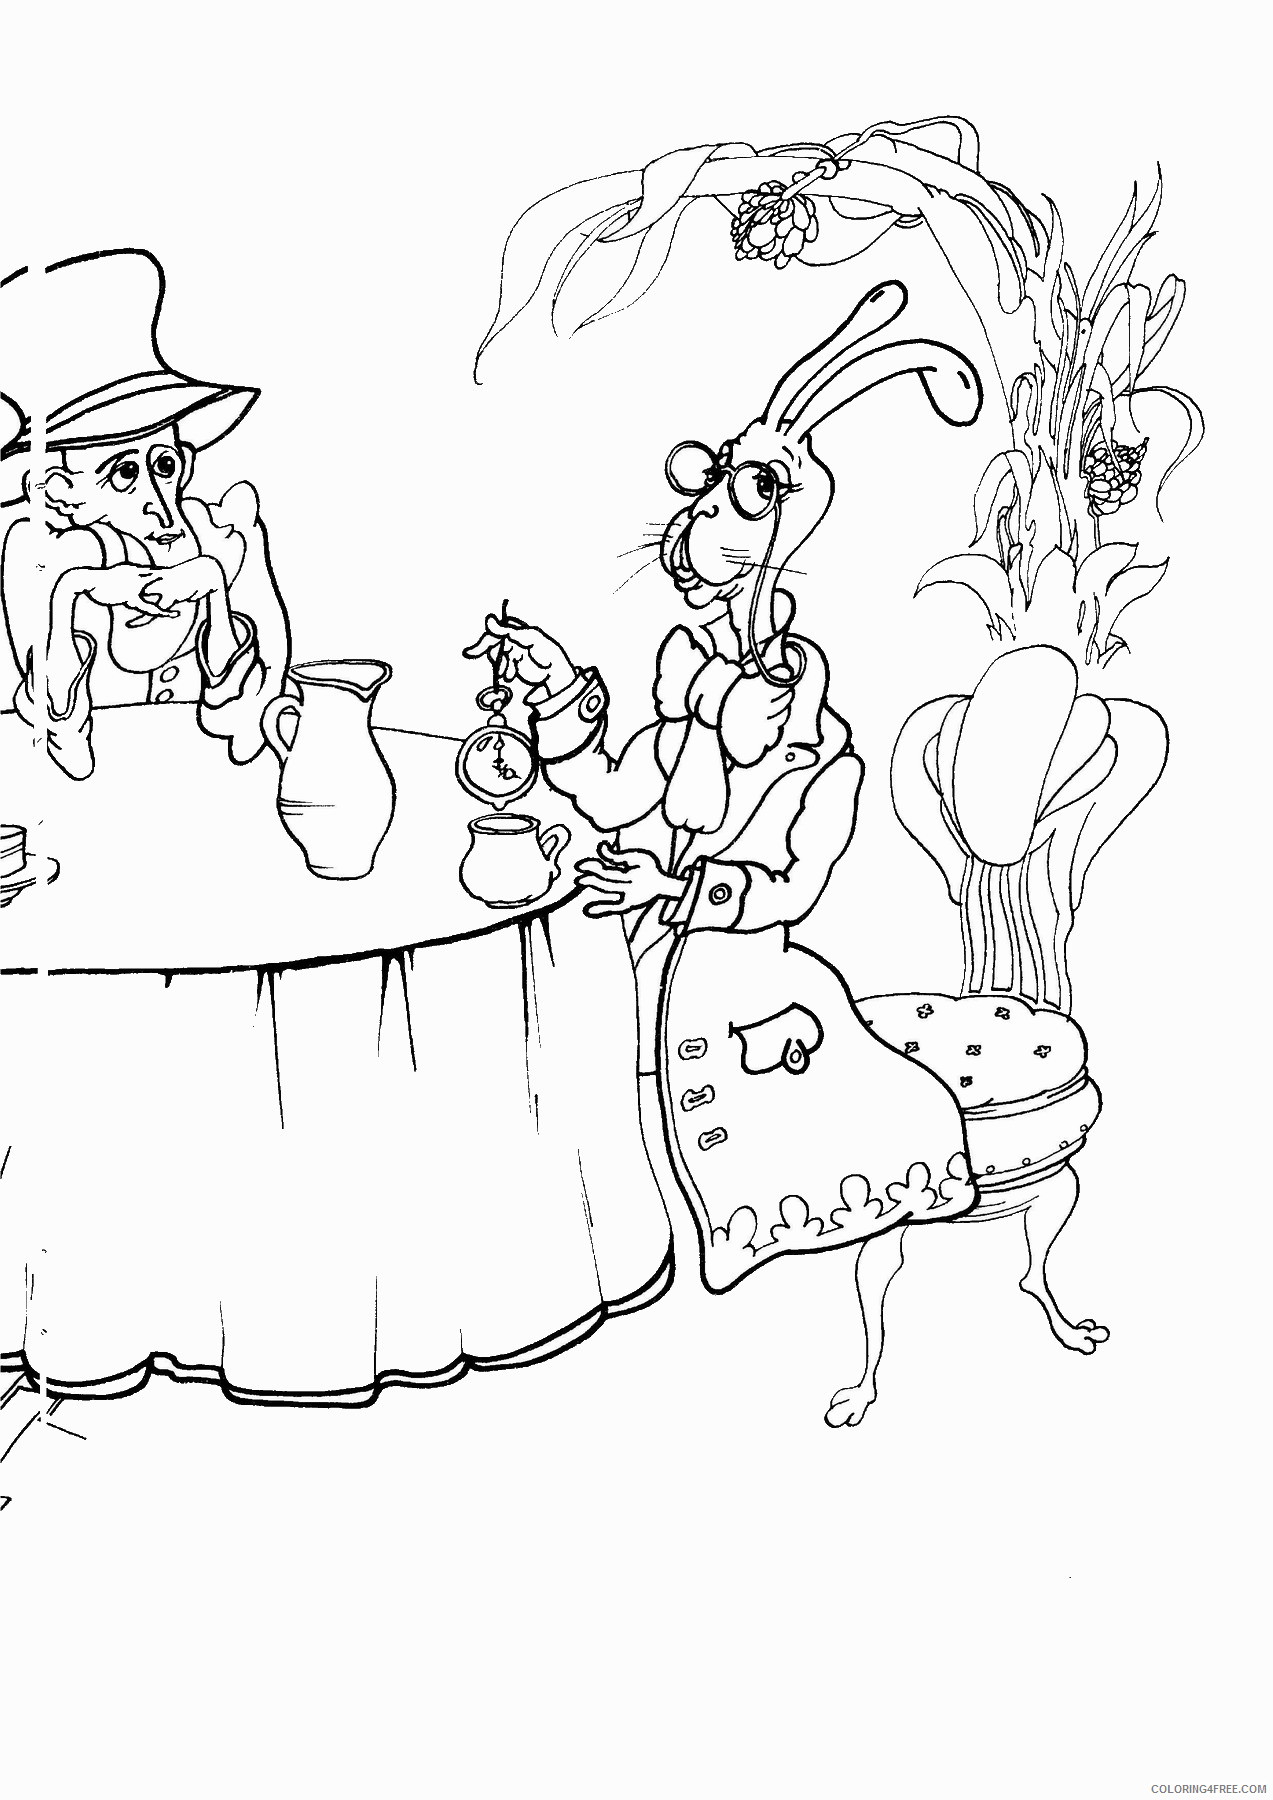 Alice in Wonderland Coloring Pages Cartoons alice_70 Printable 2020 0364 Coloring4free